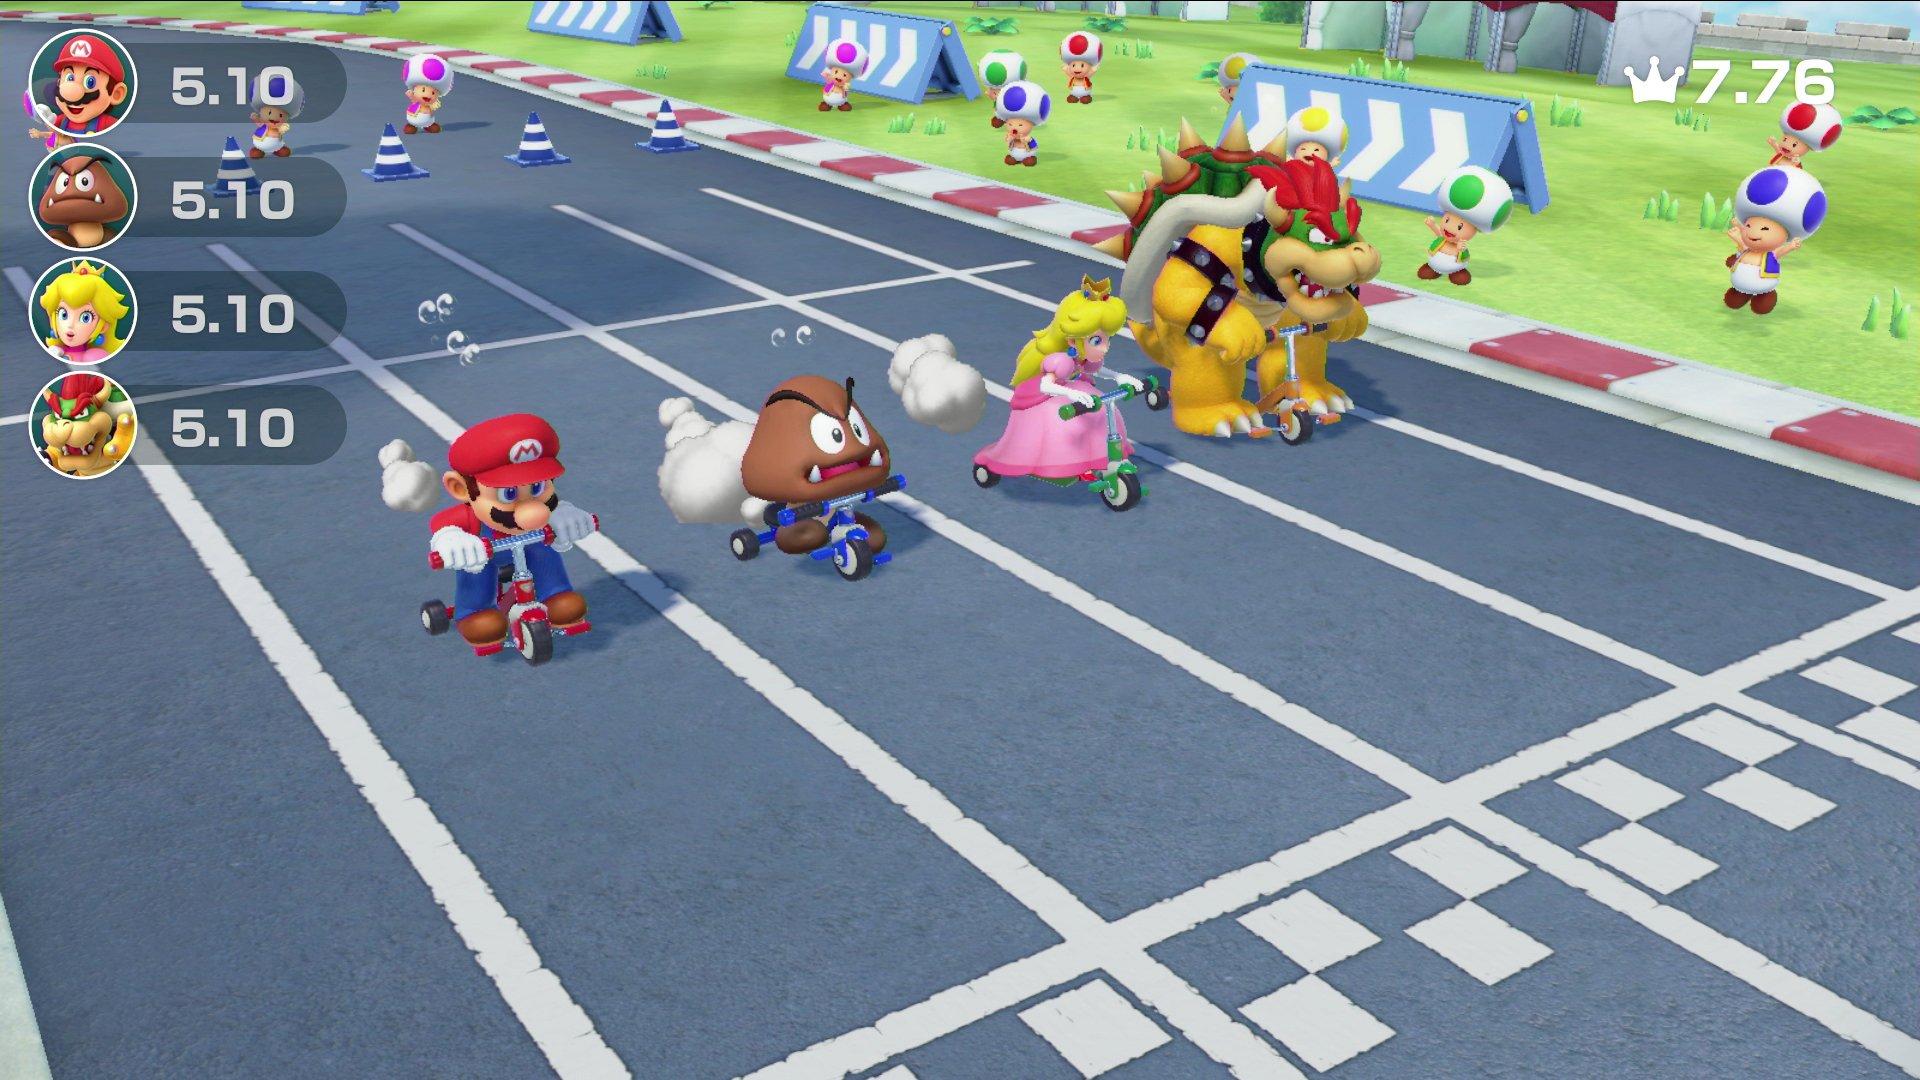 Super Mario Party's use of two Switch screens is a technological marvel